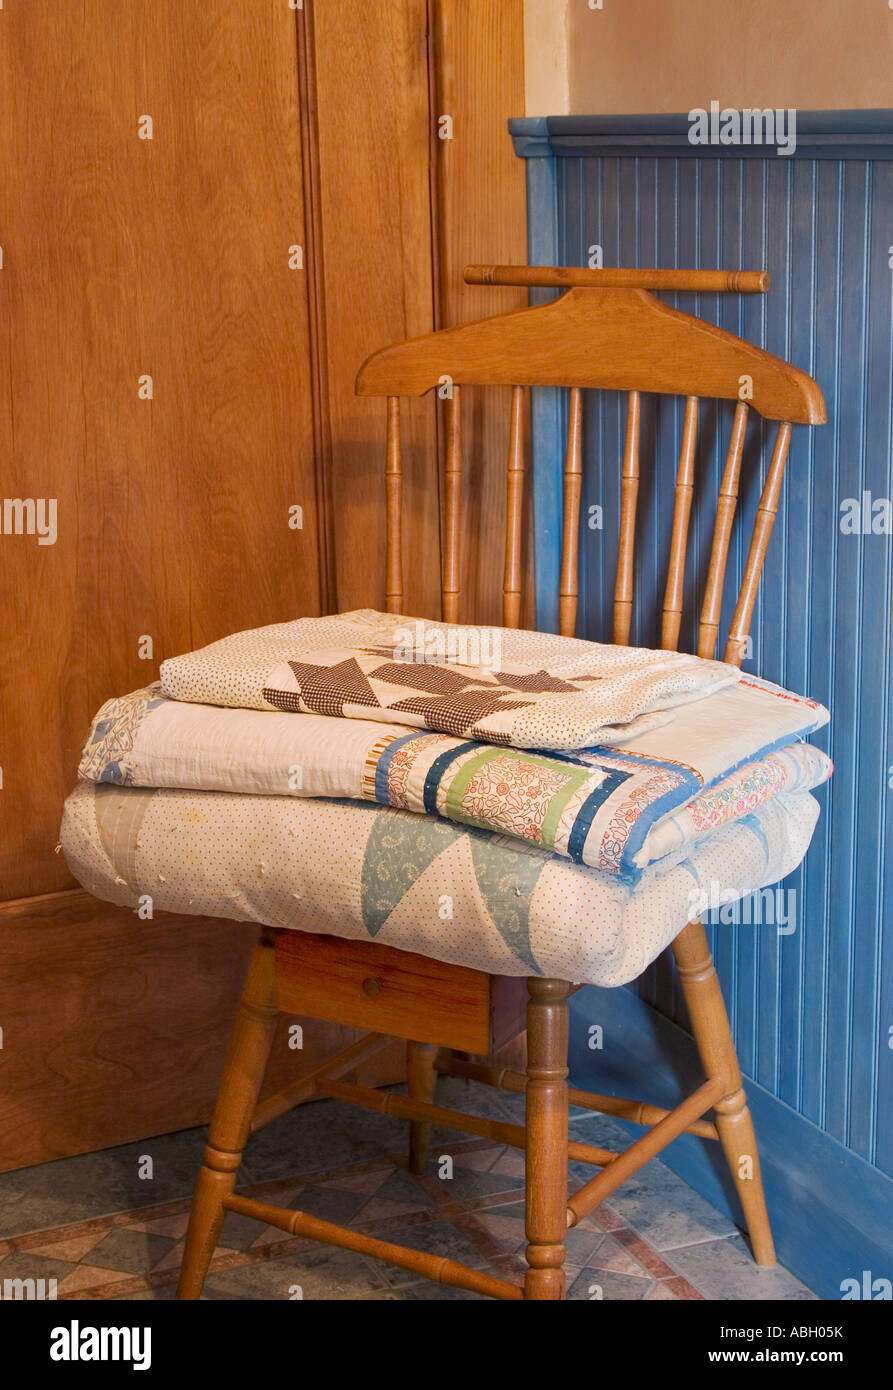 Folded quilts on a wood chair with blue wainscoting behind. Stock Photo